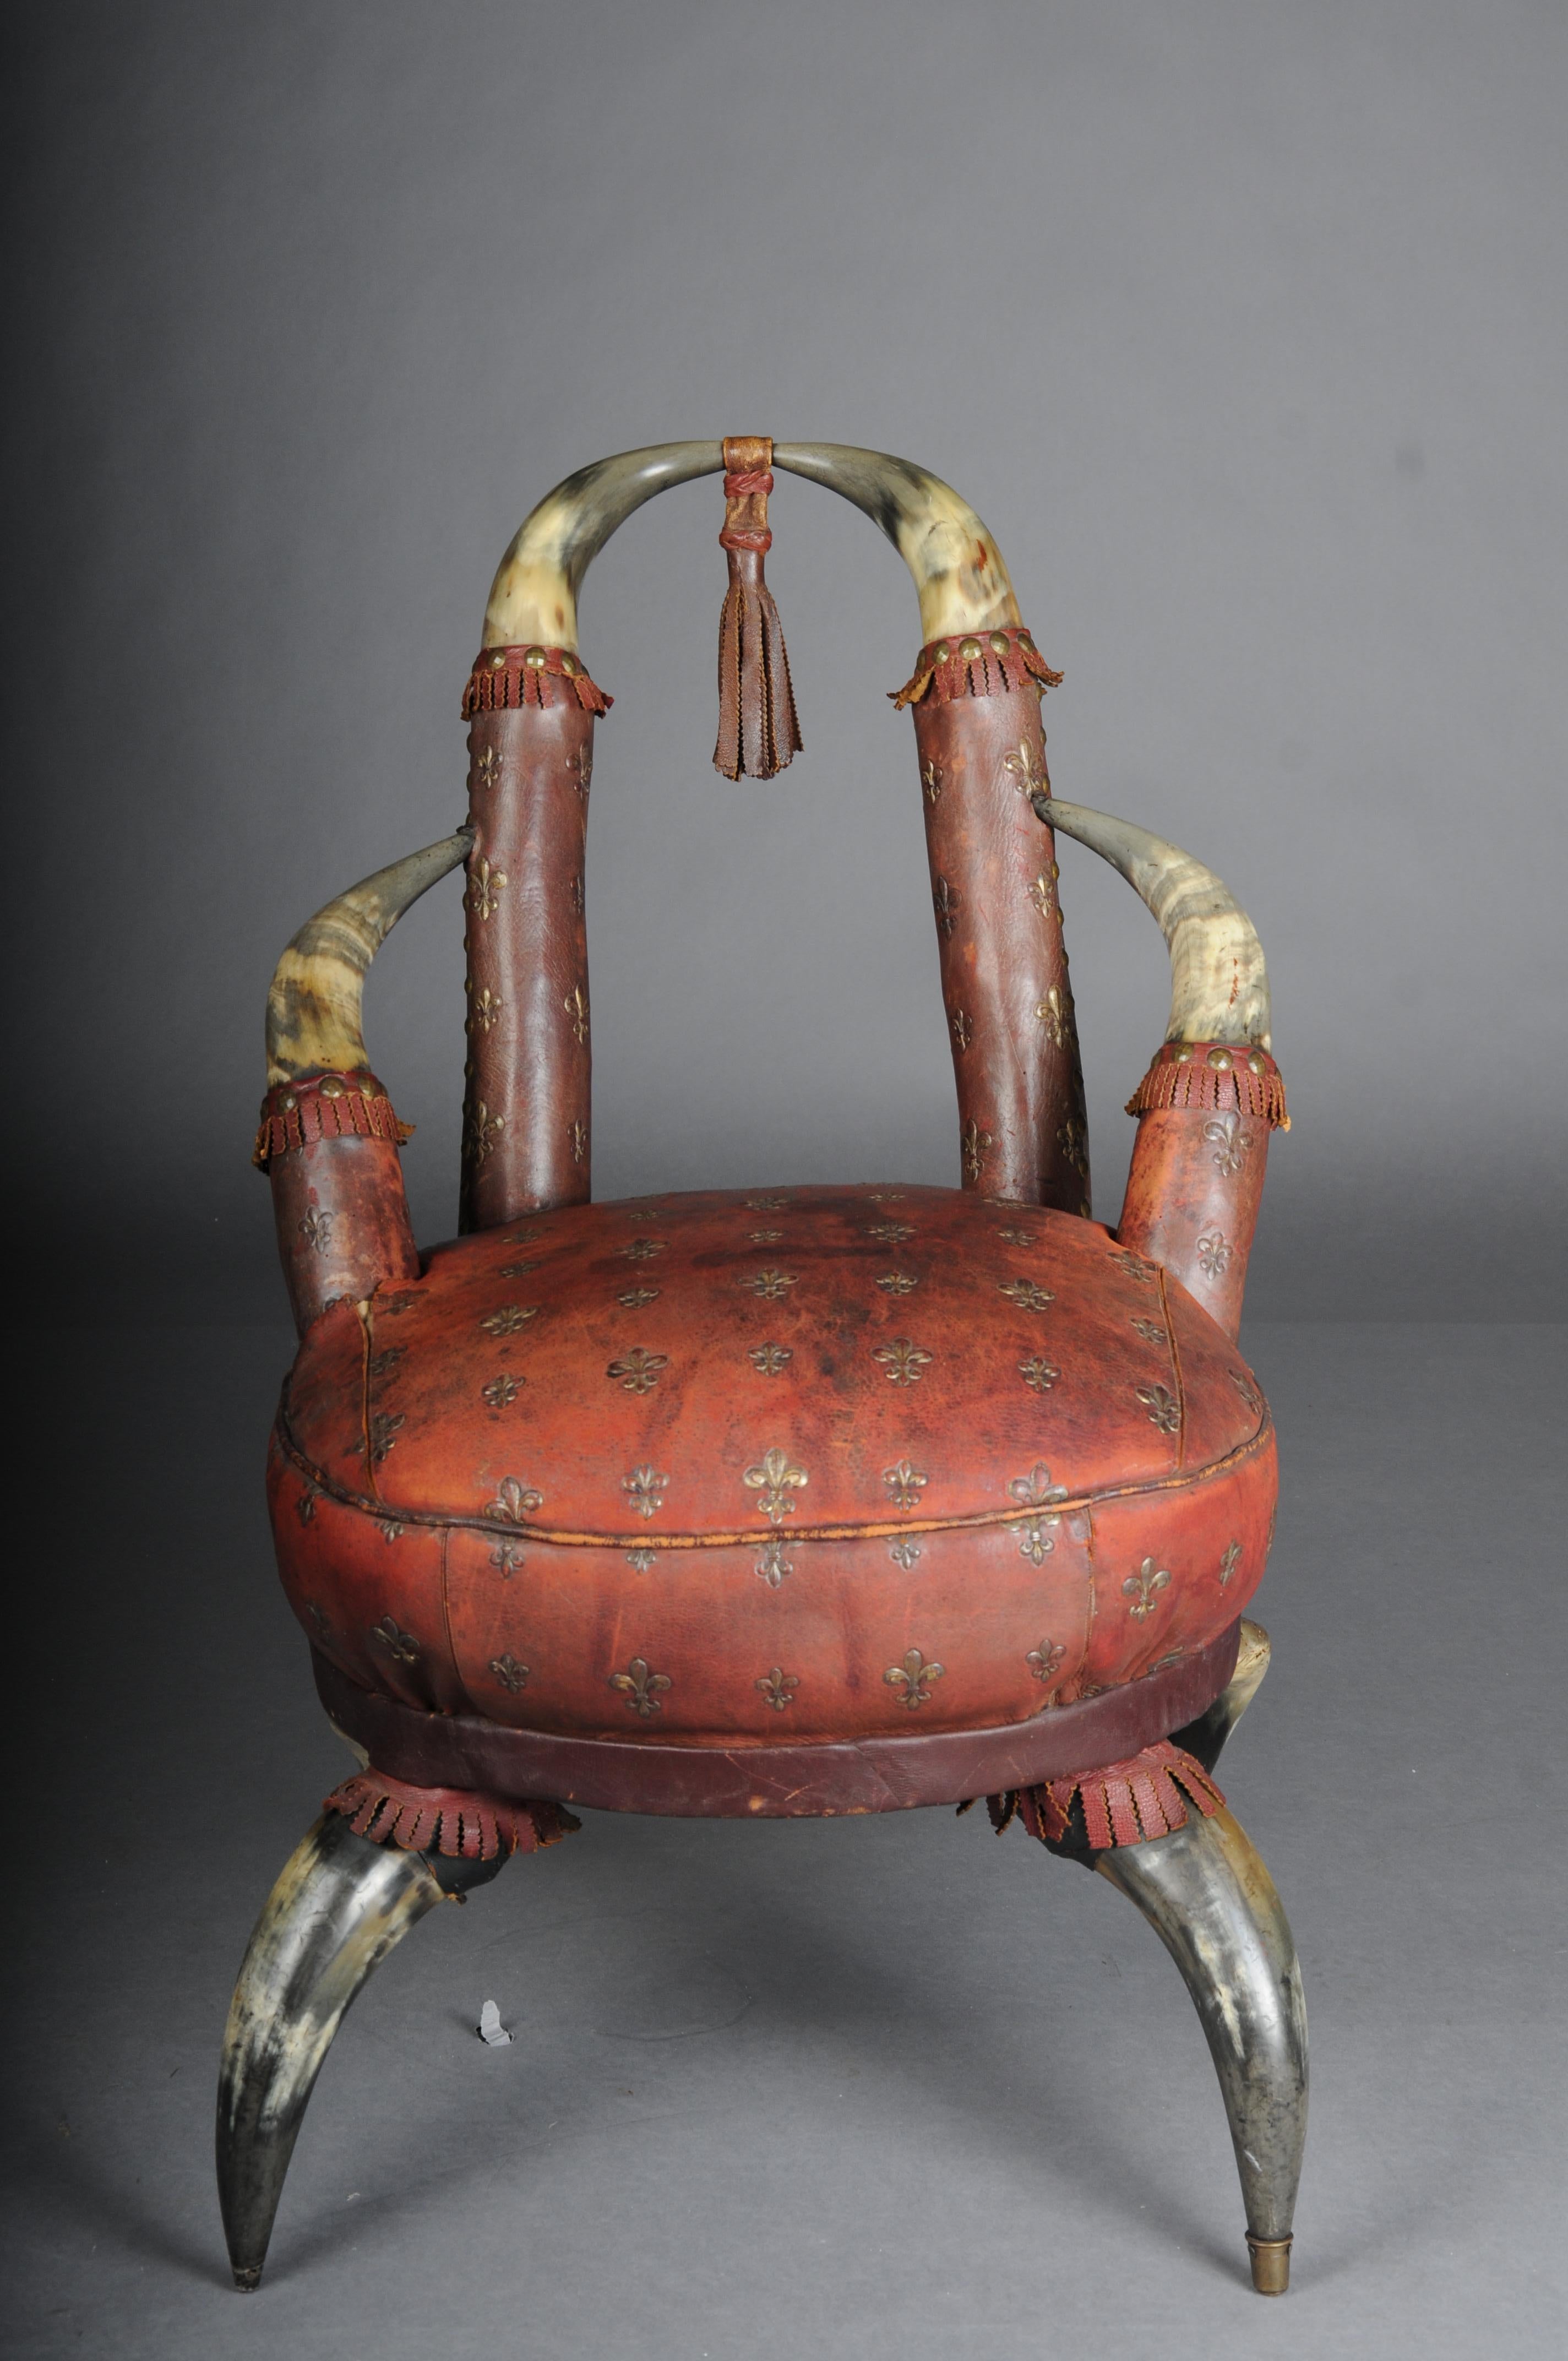 Museum-quality antique horn chair Victoria around 1870.

Extravagant antique horn chair, probably England.

Seat cover with spring core padding covered with genuine cowhide. Seat scattered with French lilies. An absolute highlight that is guaranteed